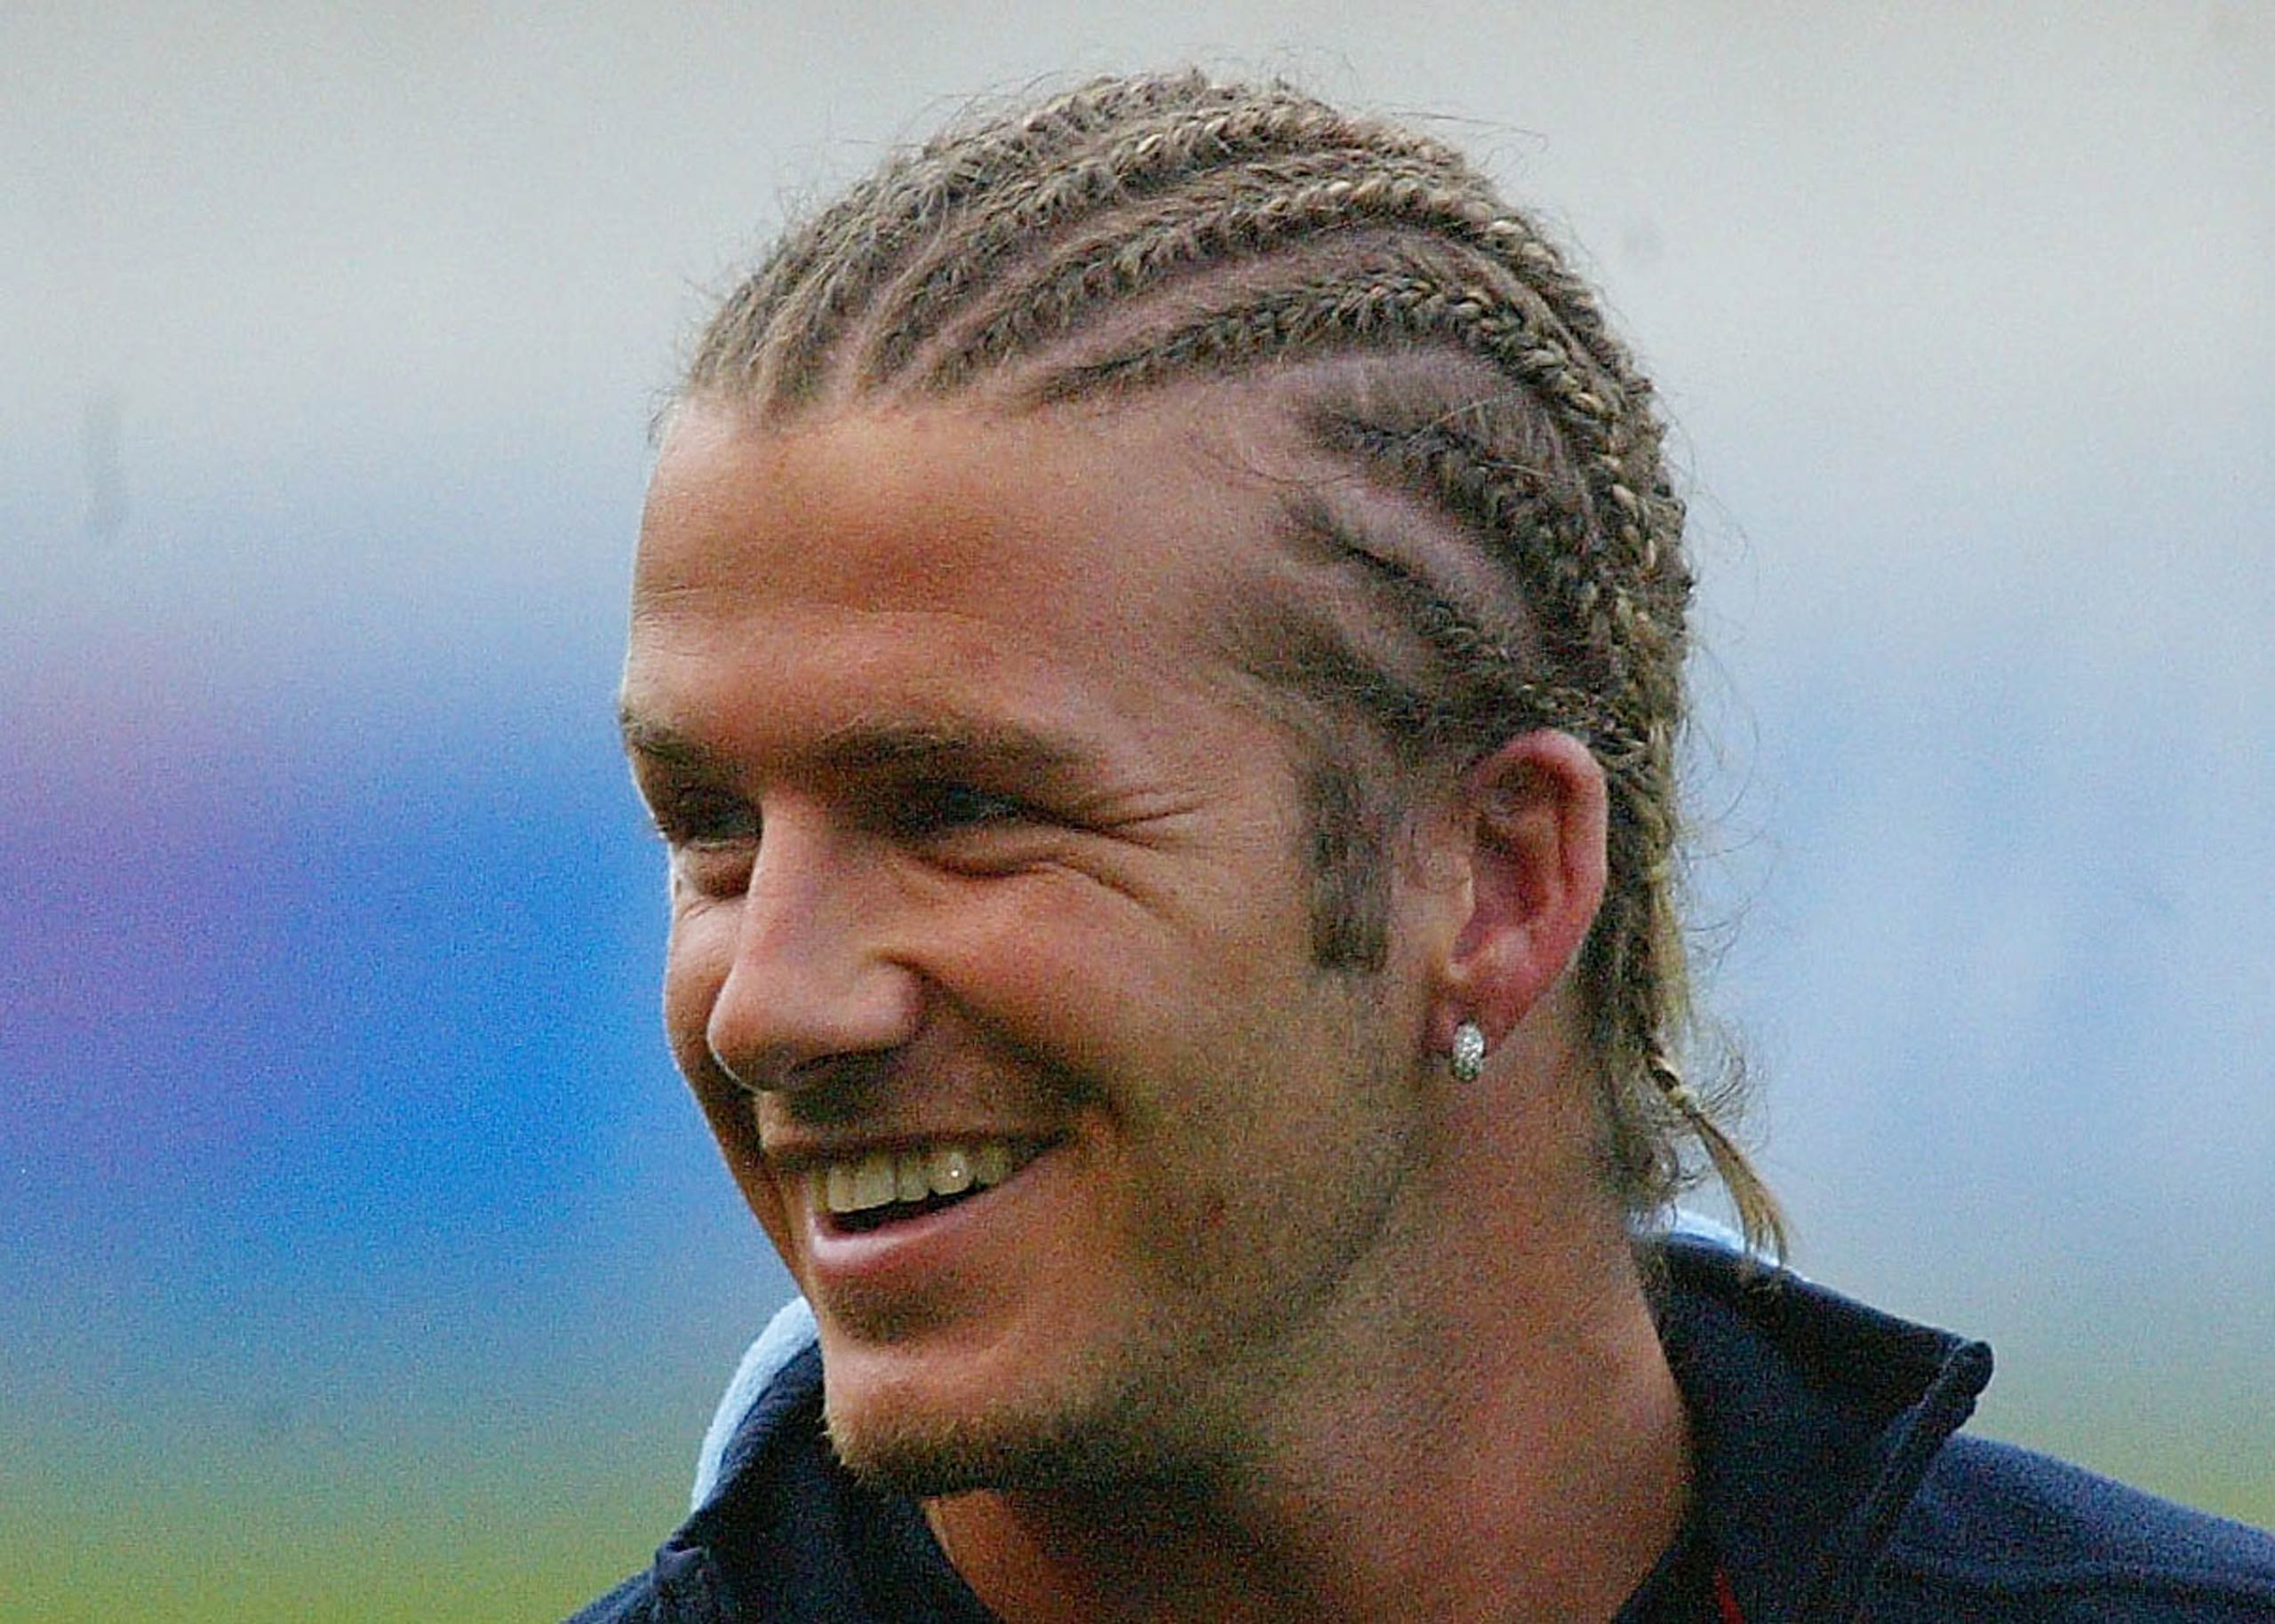 David Beckham looks on during the England training session at ADSL Stadium in Durban, South Africa in 2003.